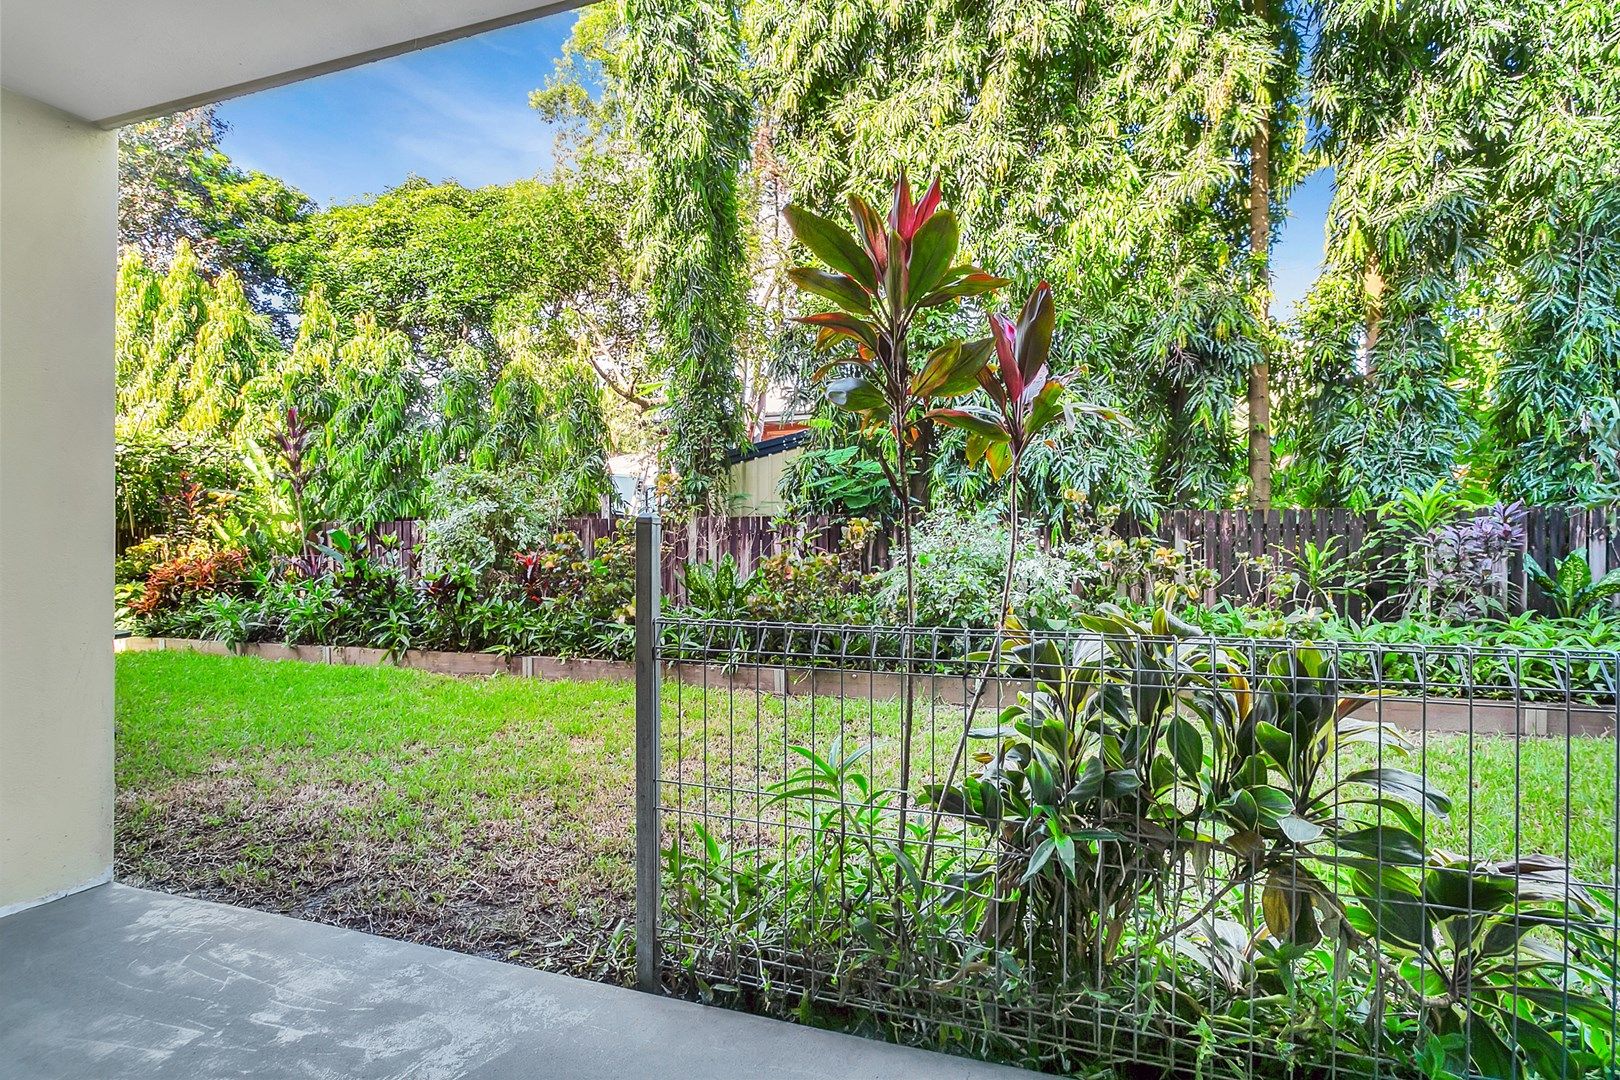 220/191 McLeod Street, Cairns North QLD 4870, Image 0